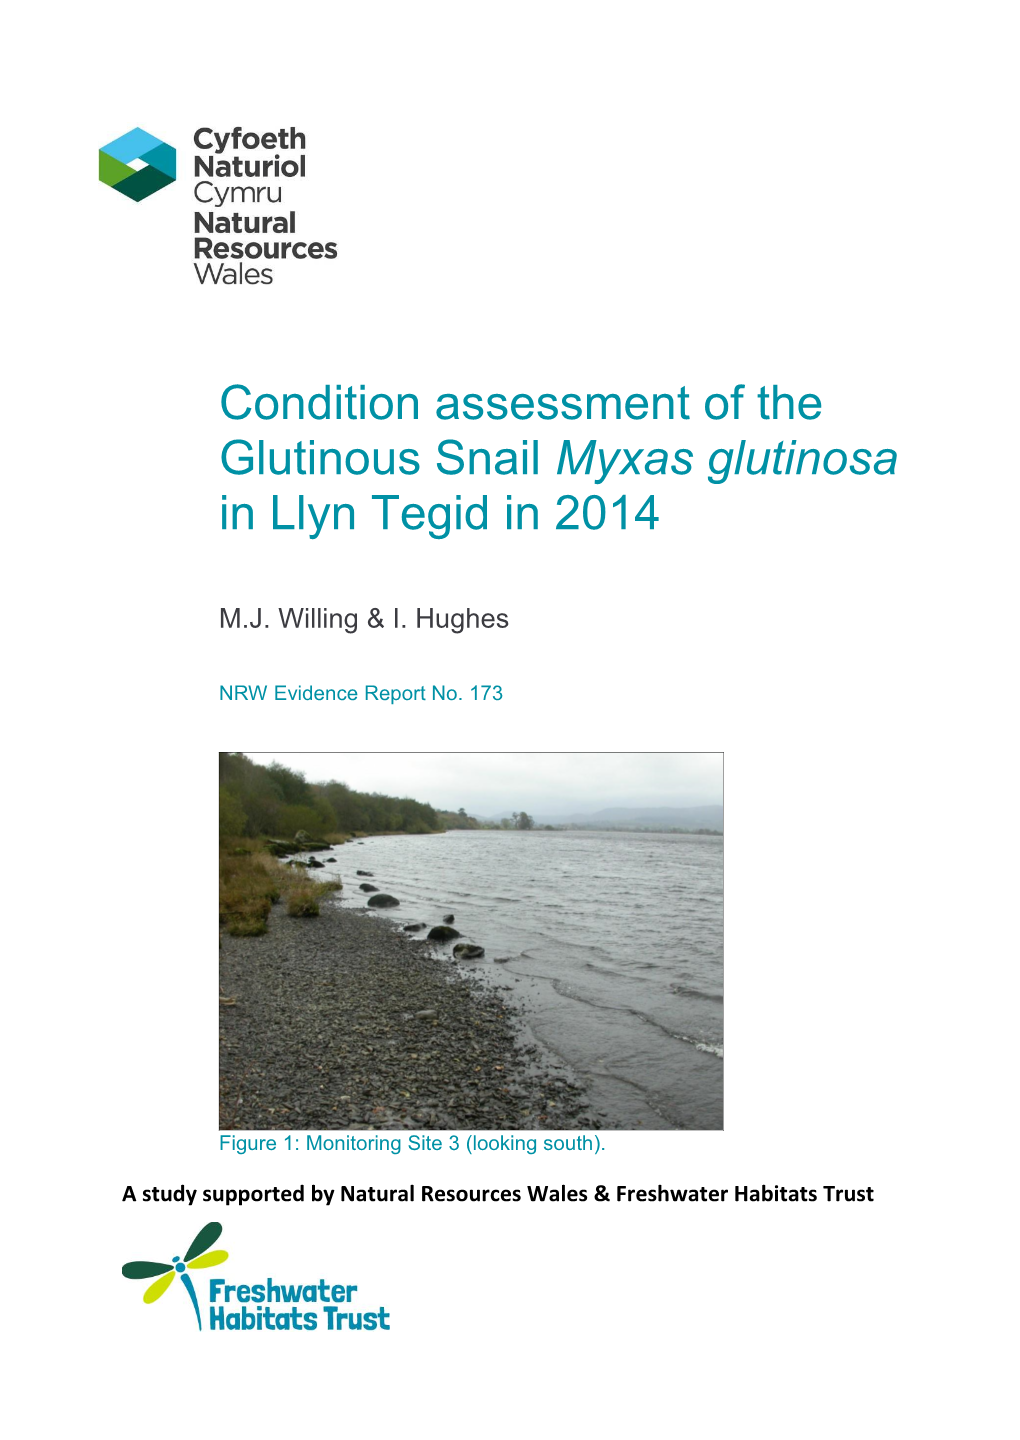 Condition Assessment of the Glutinous Snail Myxas Glutinosa in Llyn Tegid in 2014